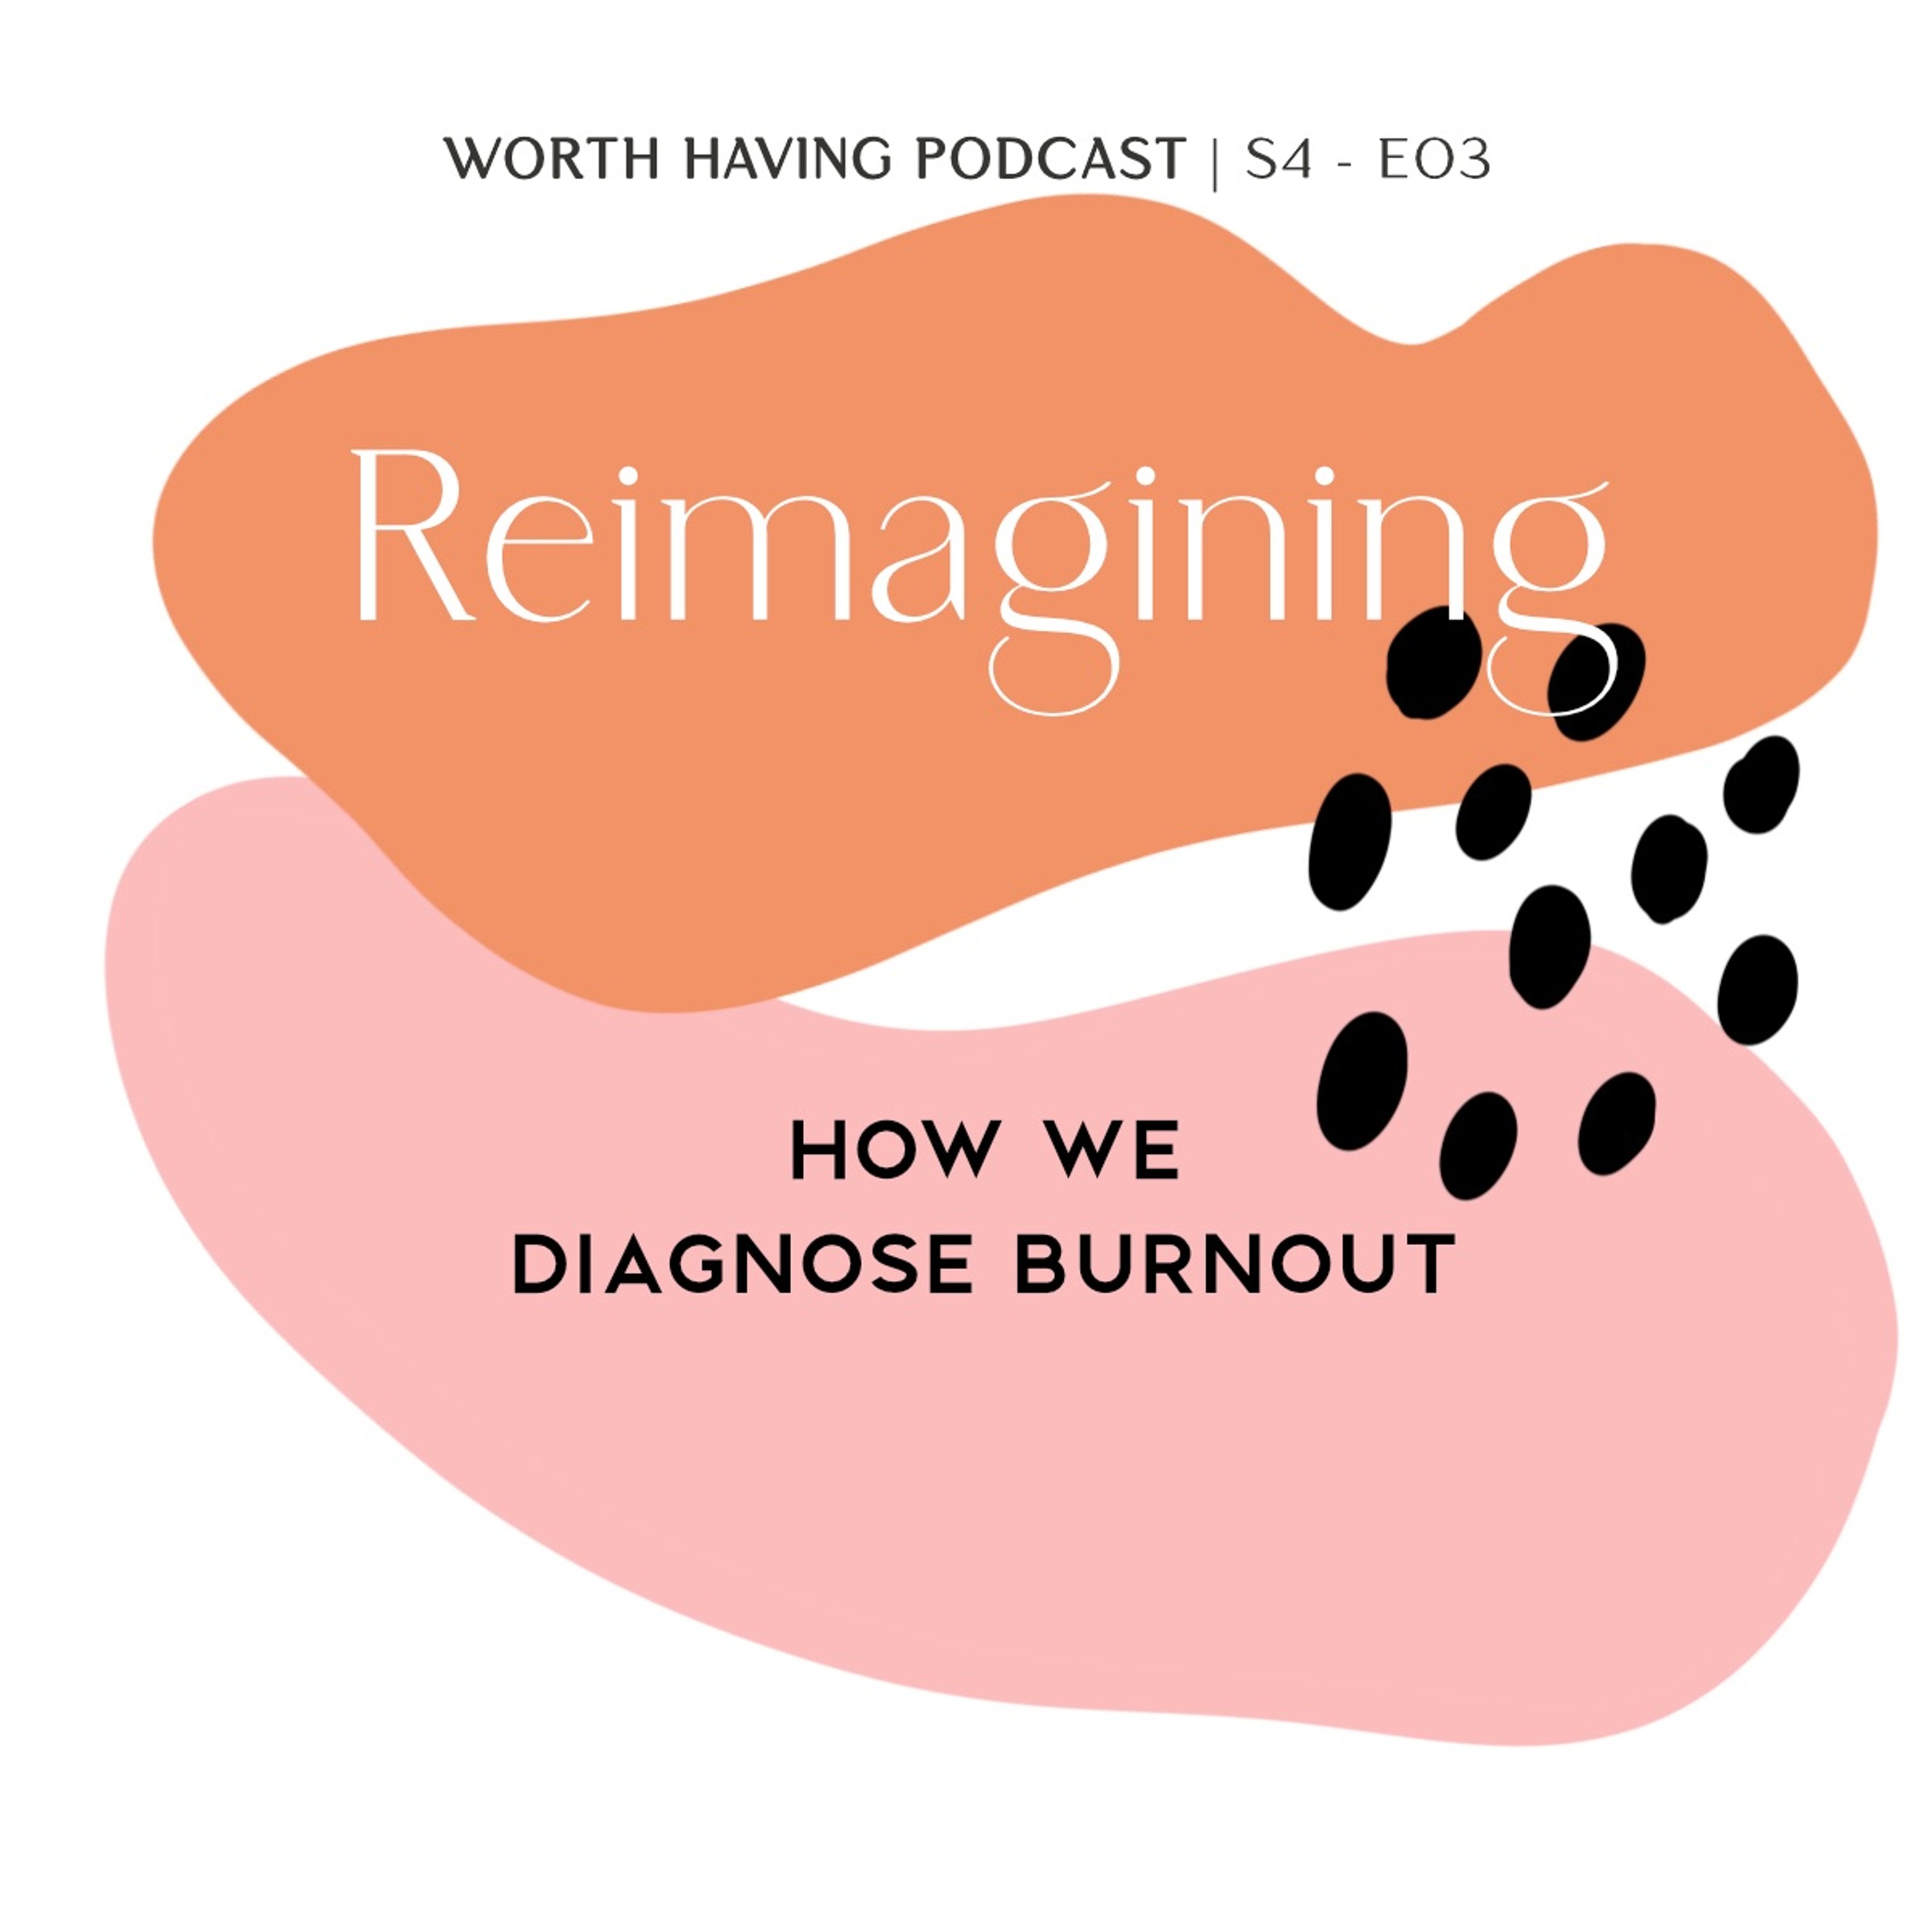 Why does it take so long to diagnose burnout?